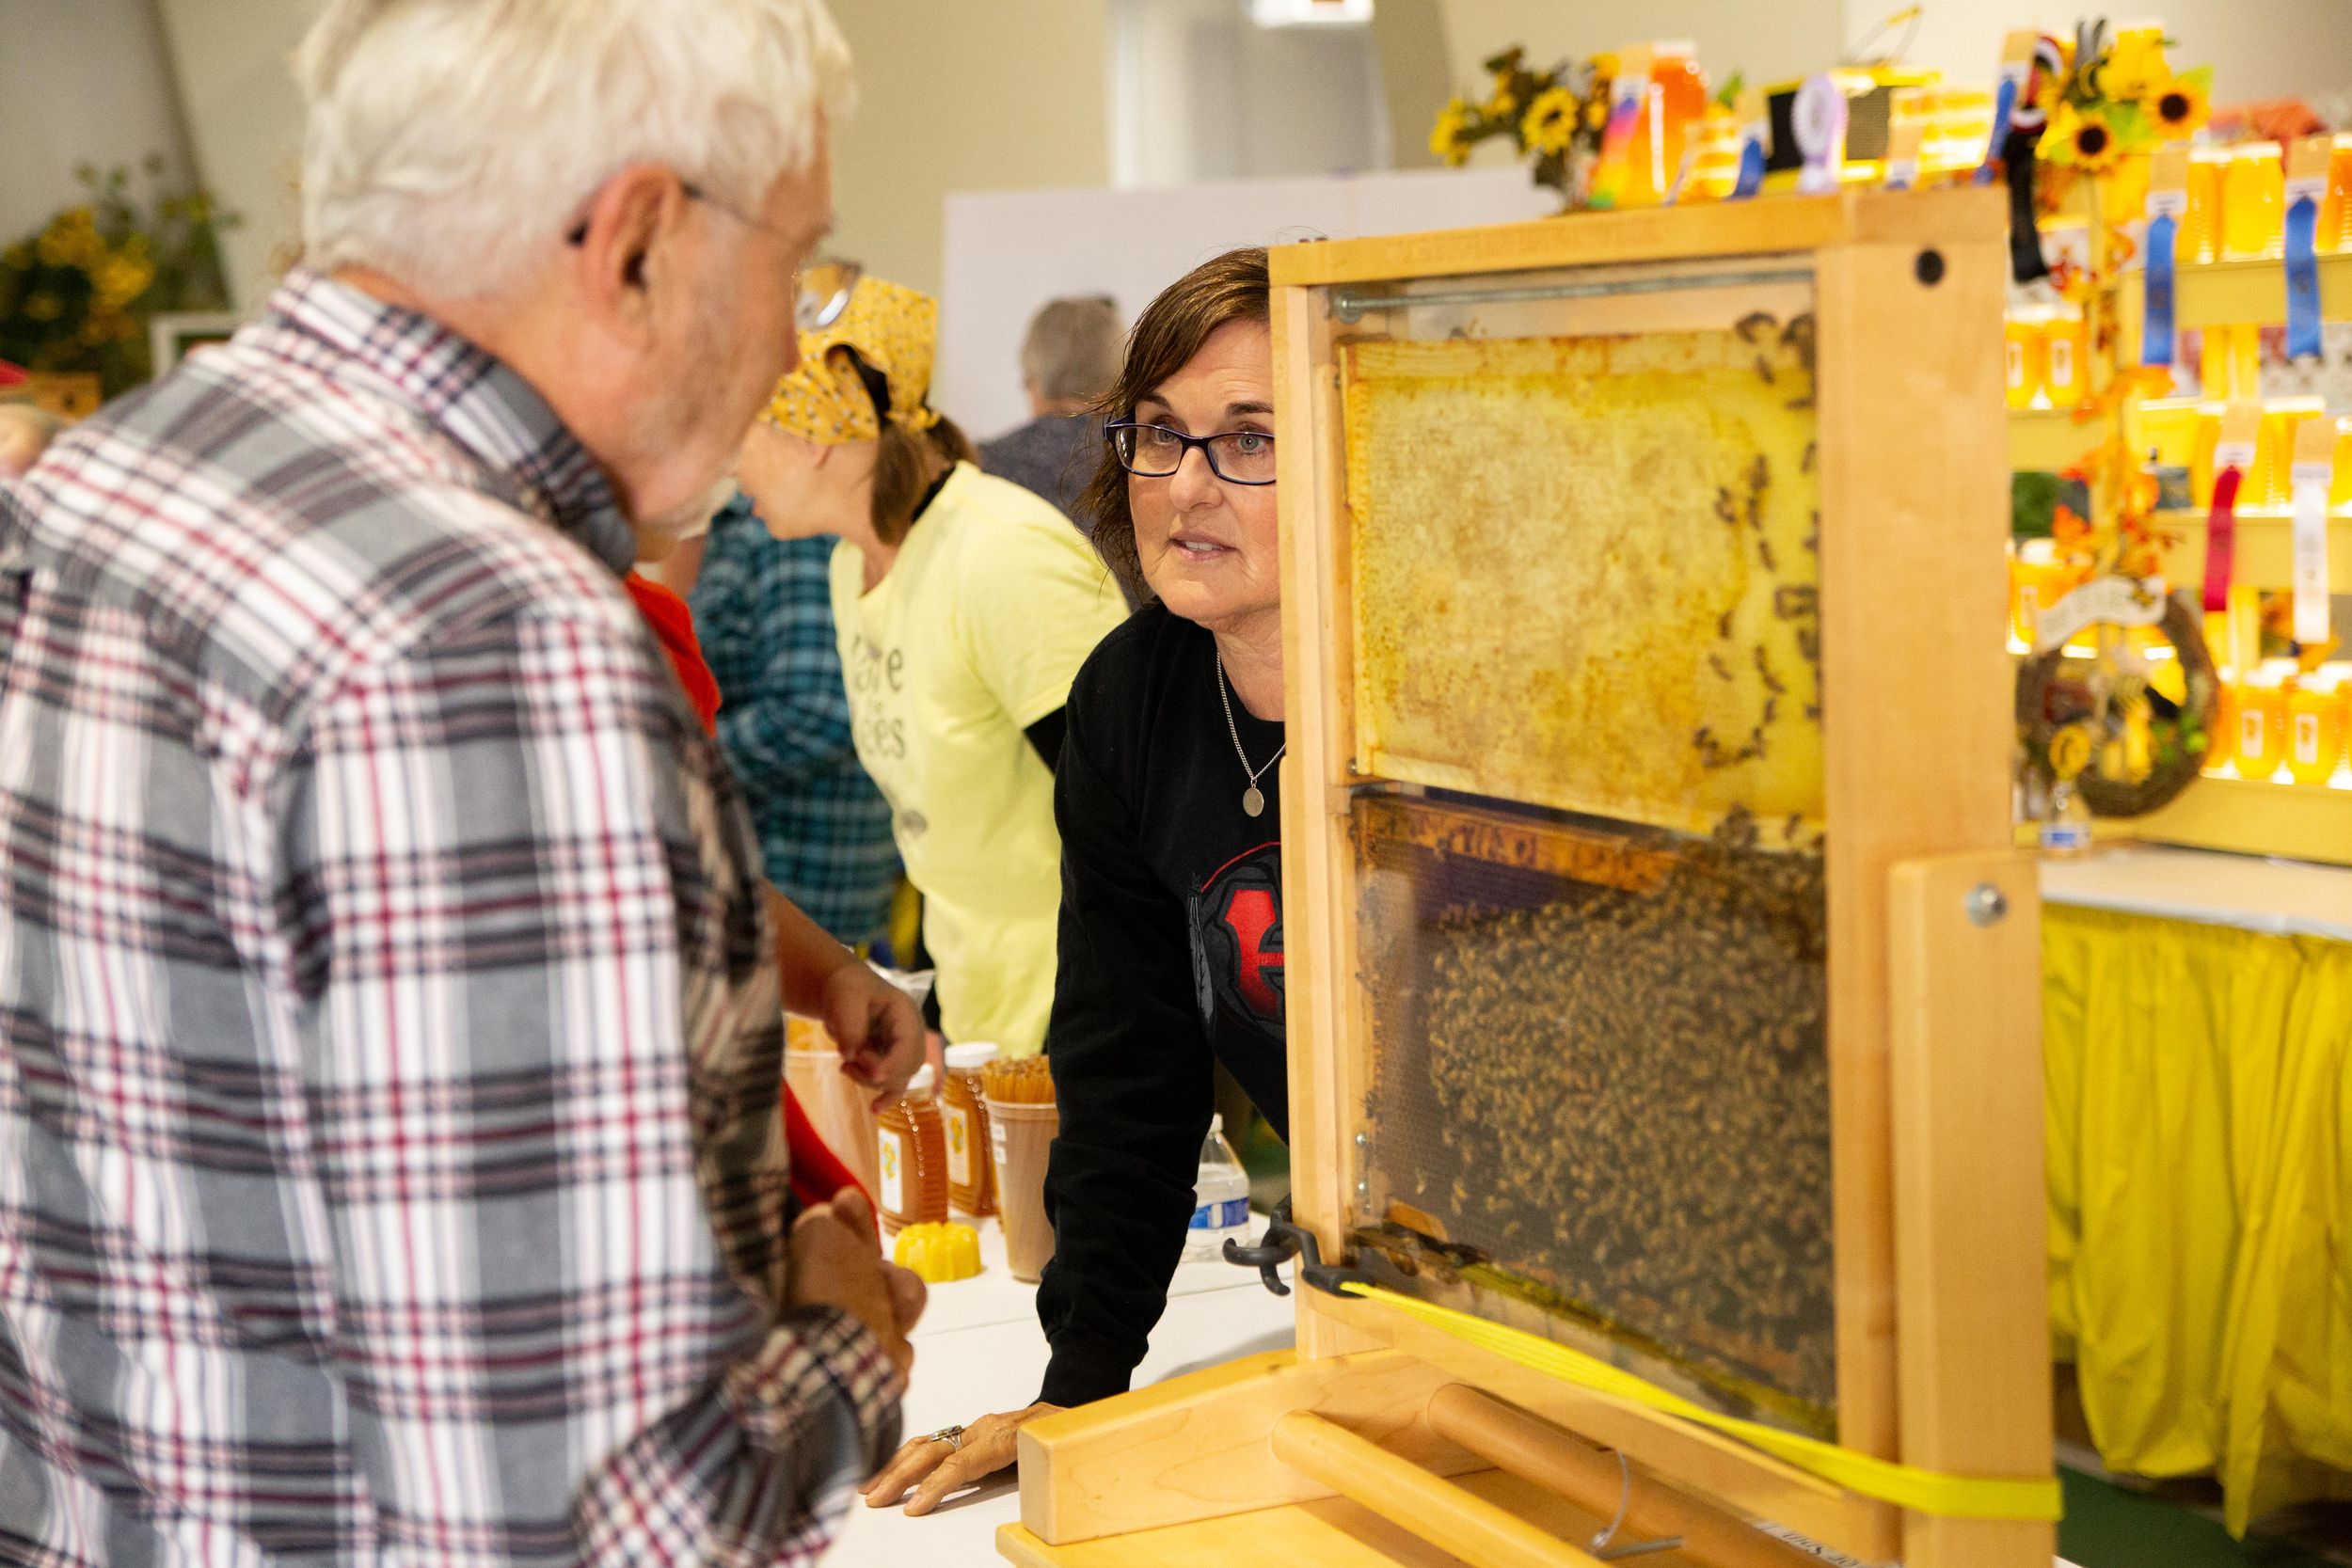 Gardening Beekeeping conference at EWU will offer latest on bee